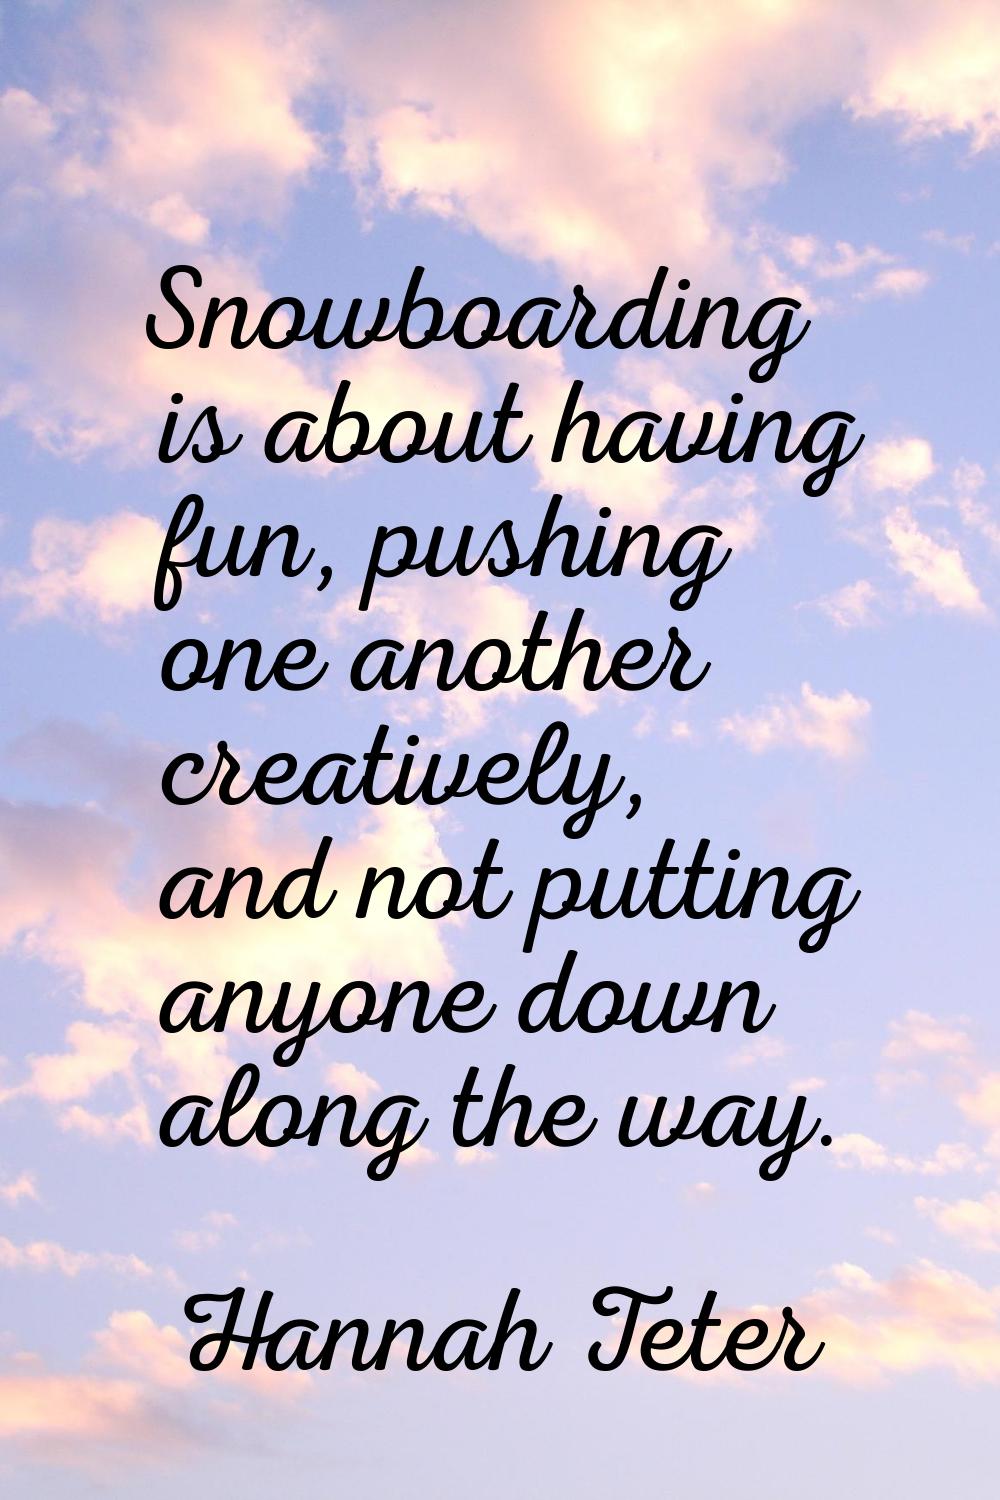 Snowboarding is about having fun, pushing one another creatively, and not putting anyone down along